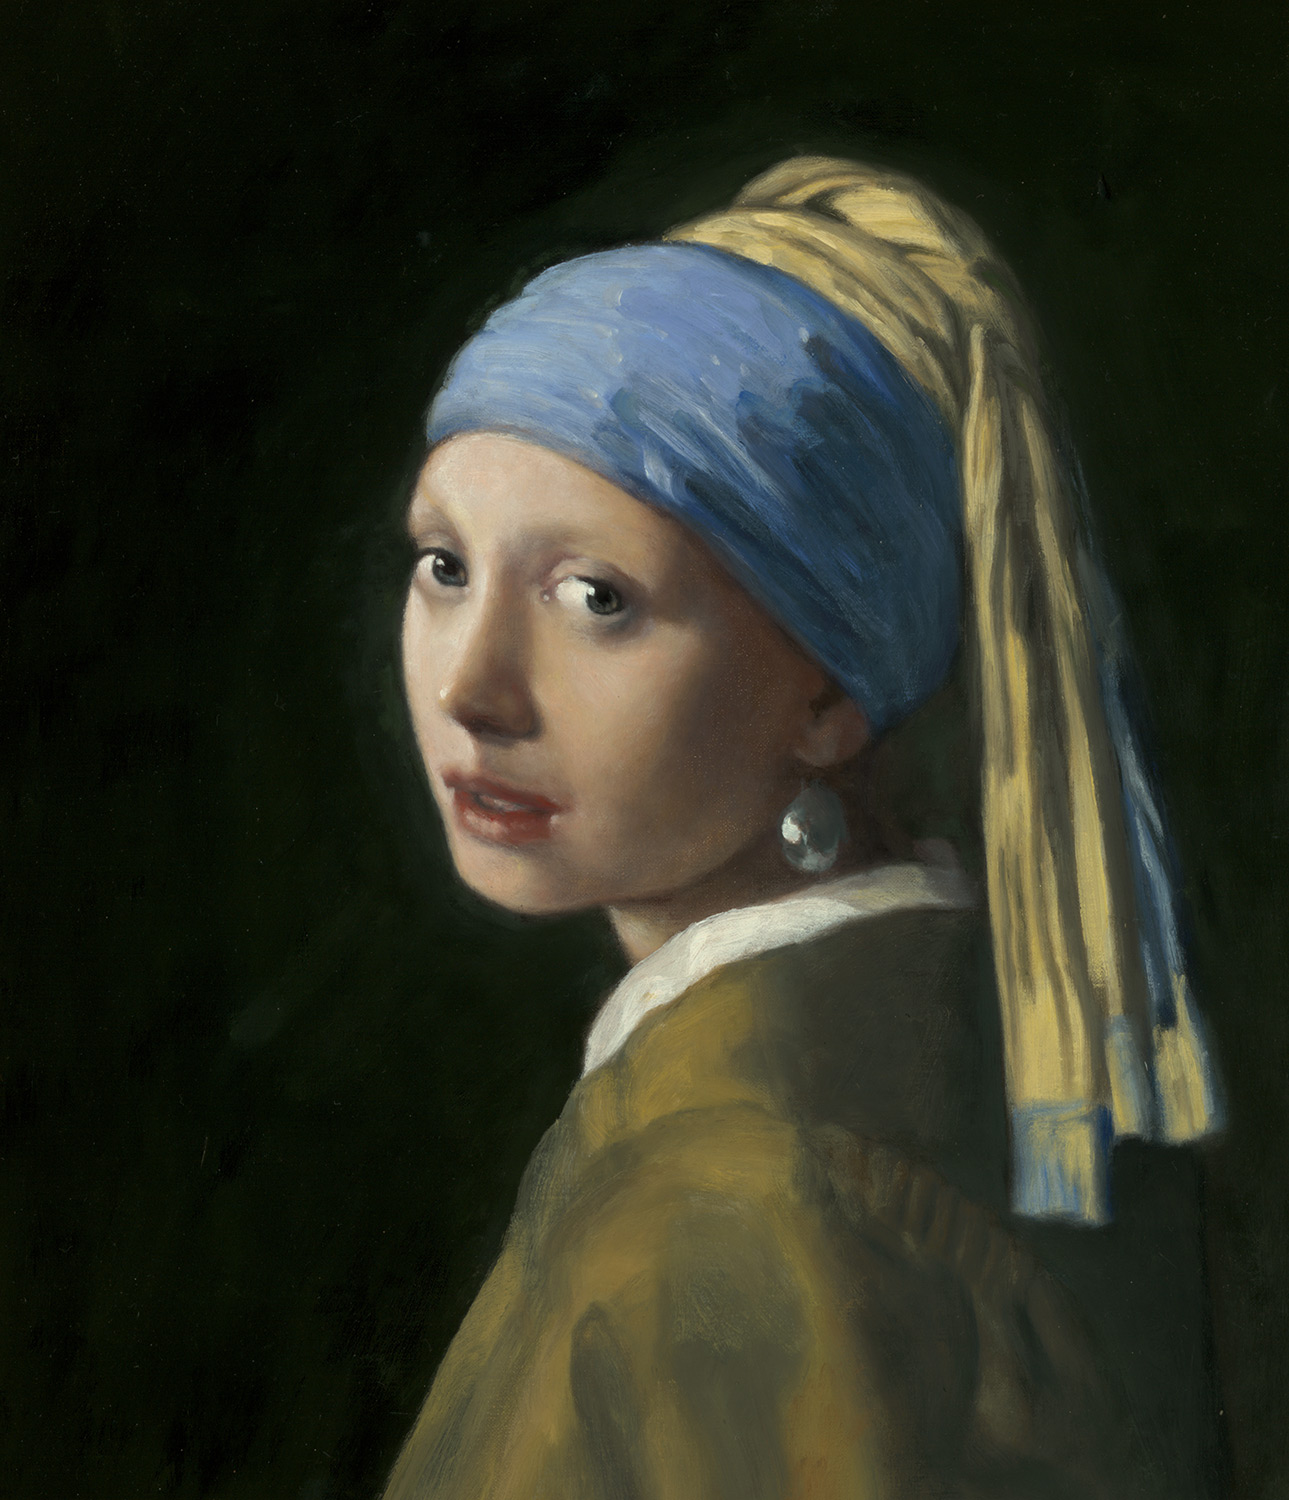 Master Copy of Johannes Vermeer's "Girl with a Pearl Earring"